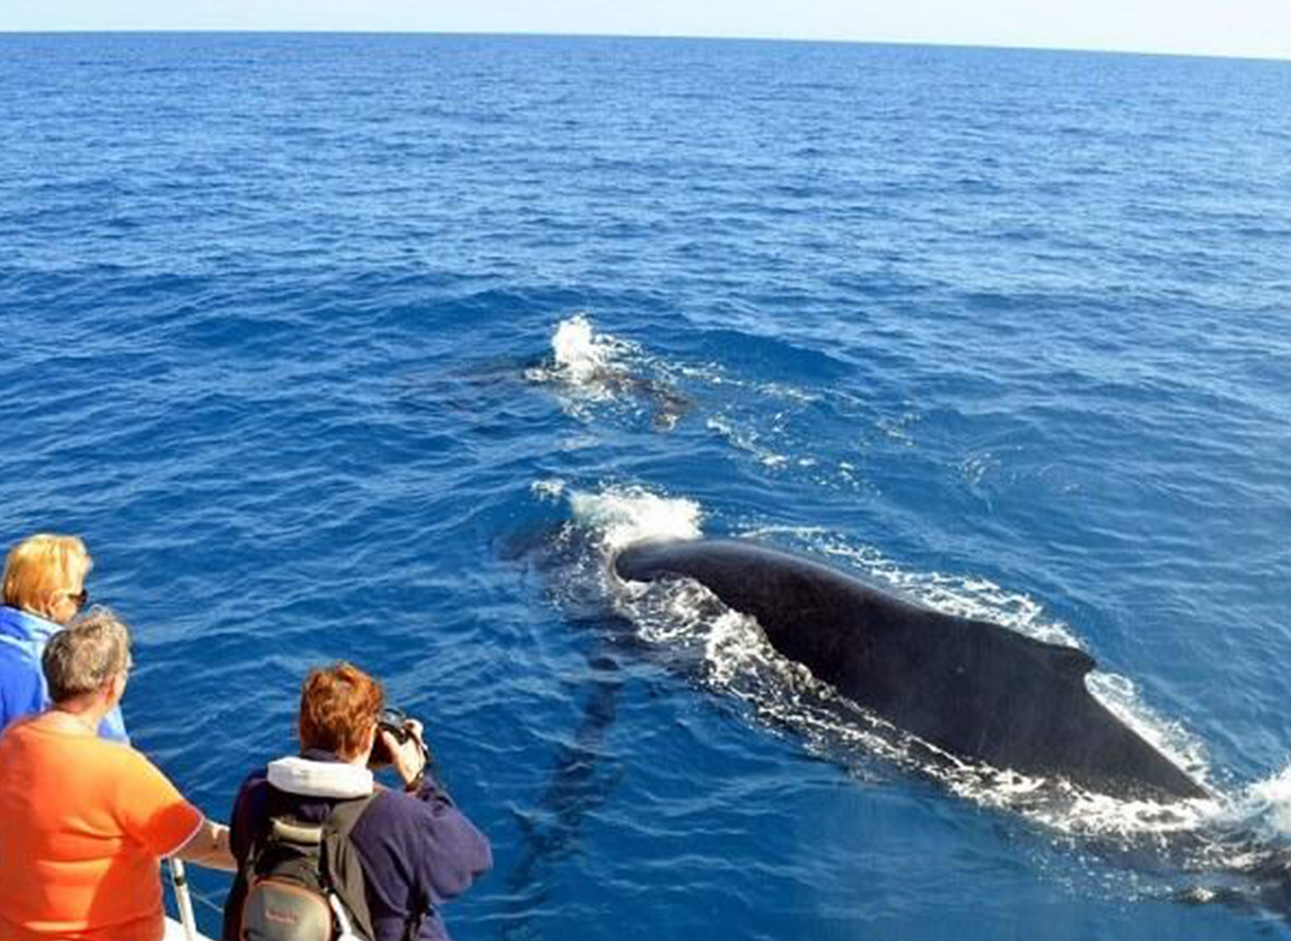 Whale Watching - Witness majestic marine creatures on exciting whale watching tours